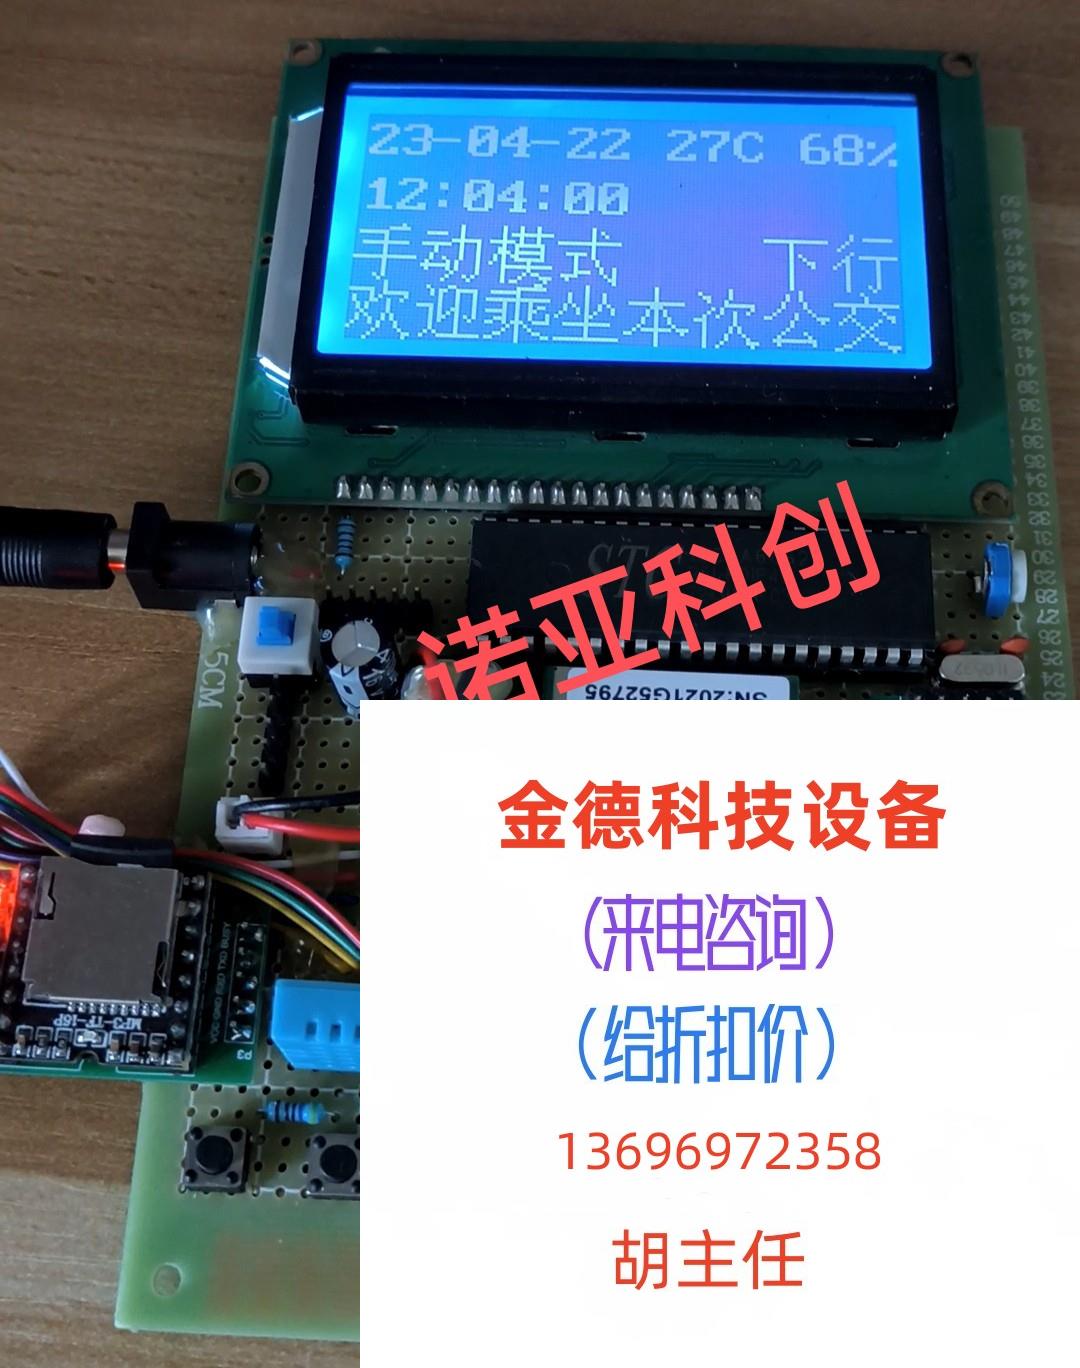 Single Chip Bus Voice Automatic Newsstand GPS Switch Door Bluetooth APP Direct Pat No Shipping Needs to RFQ-Taobao